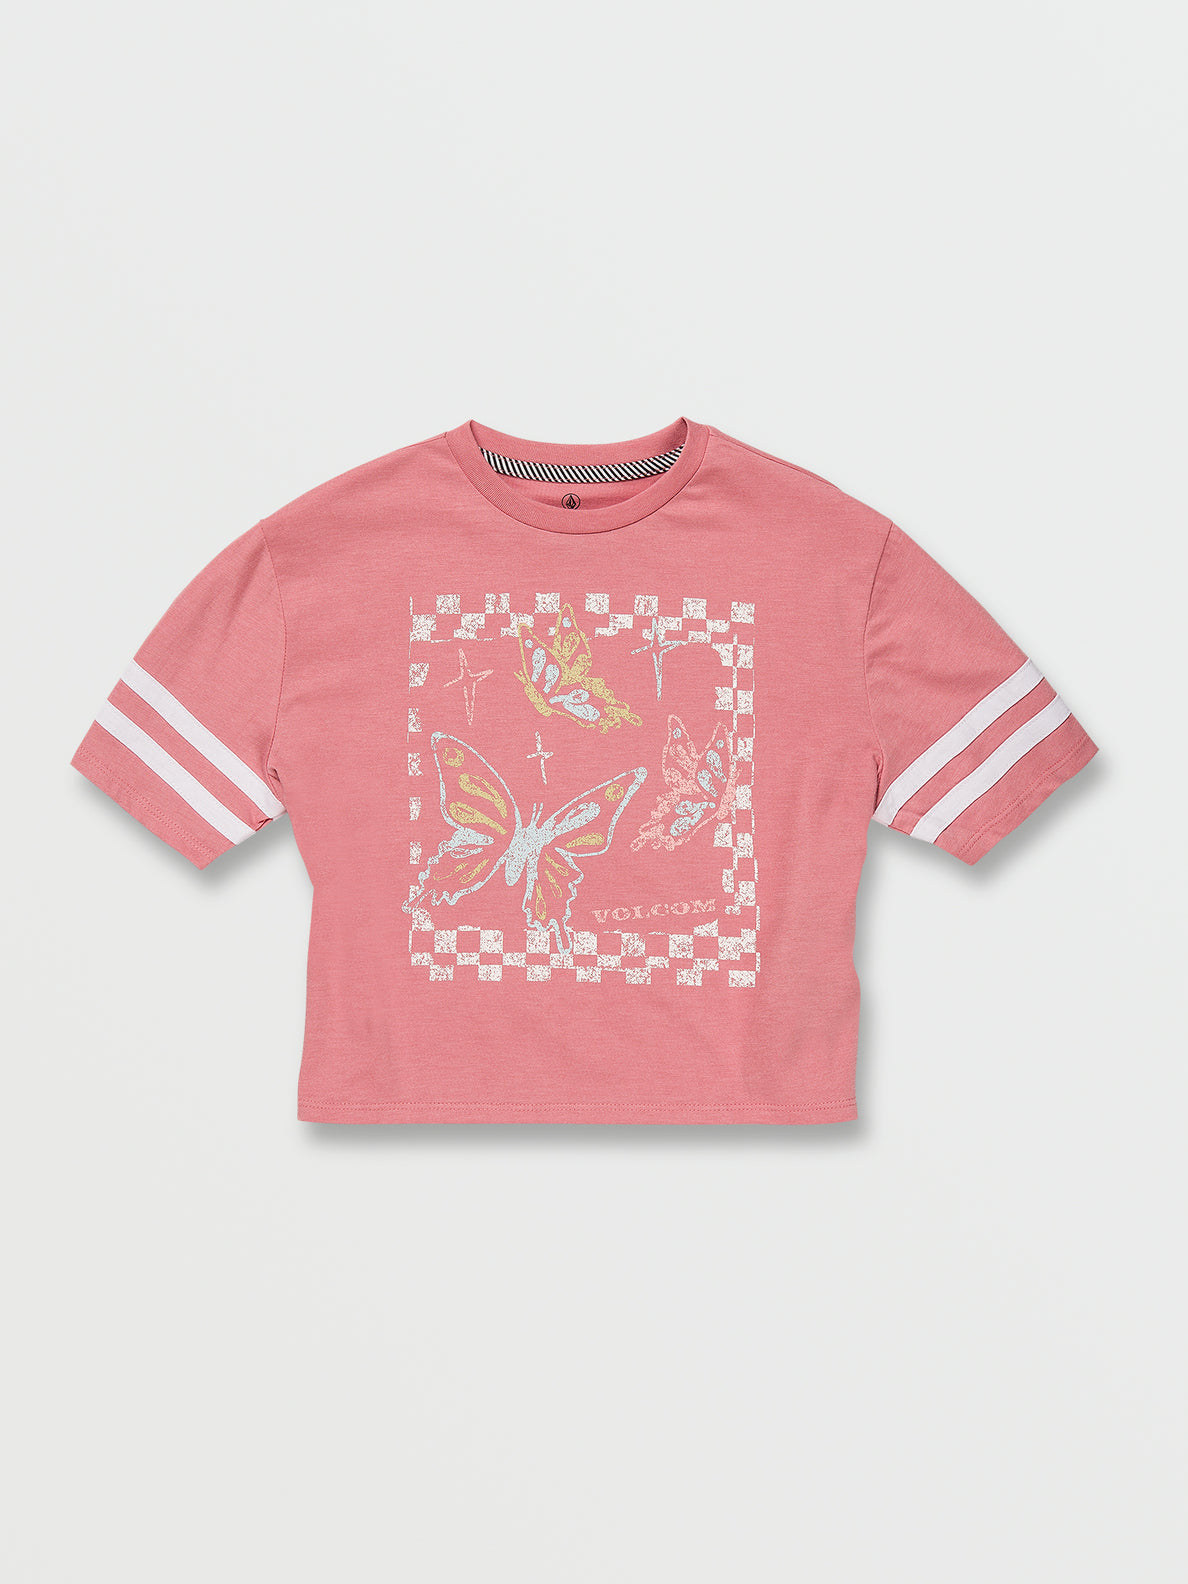 Girls Truly Stoked Tee - Desert Pink (R3512303_DSP) [F]